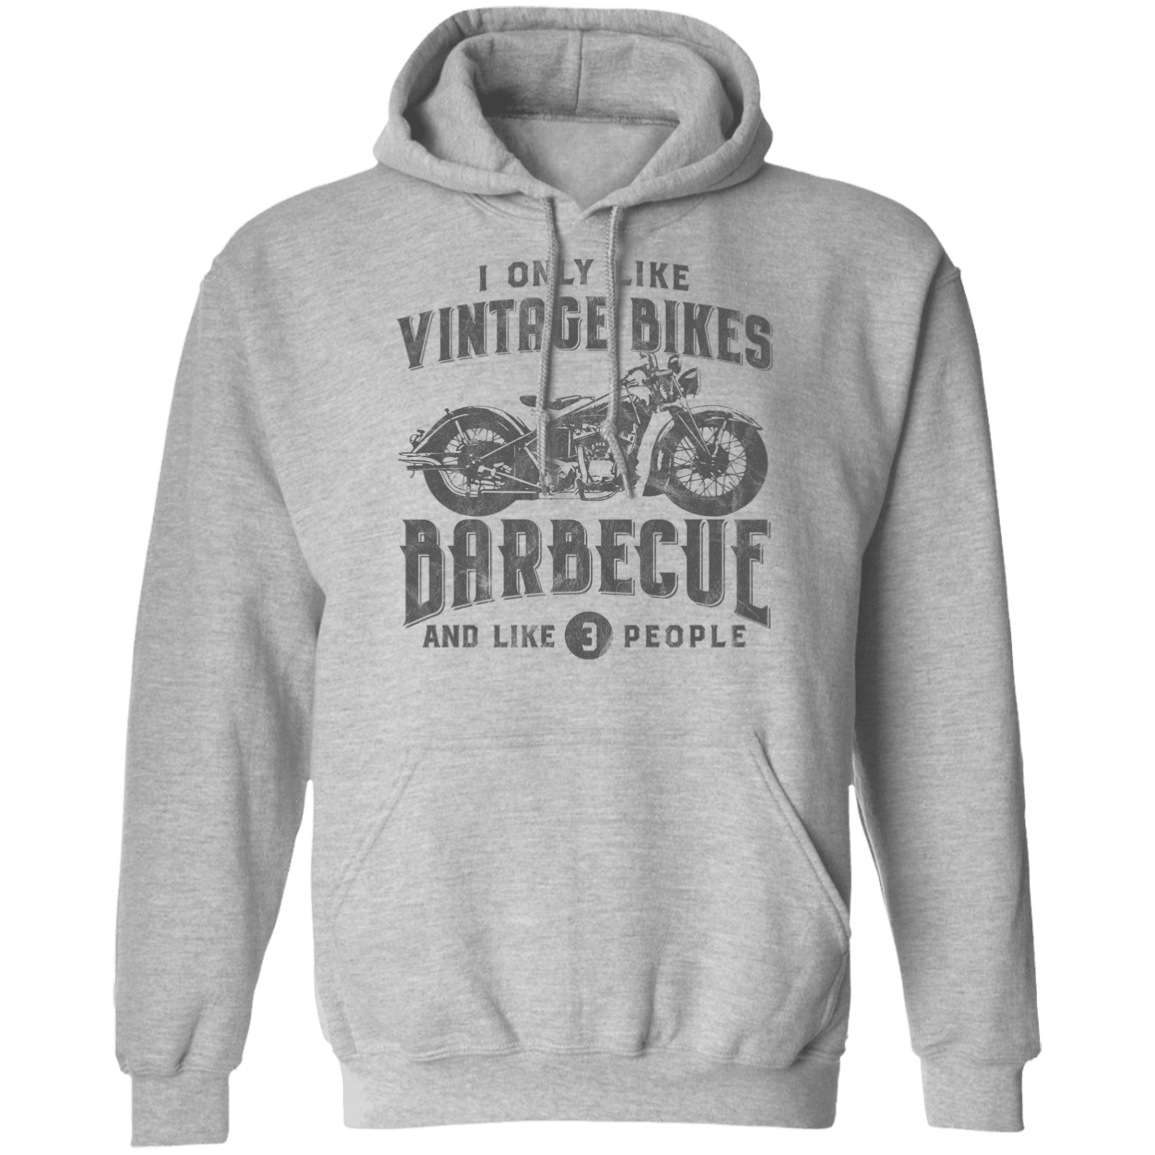 Vintage Bikes and Barbecue Pullover Hoodie